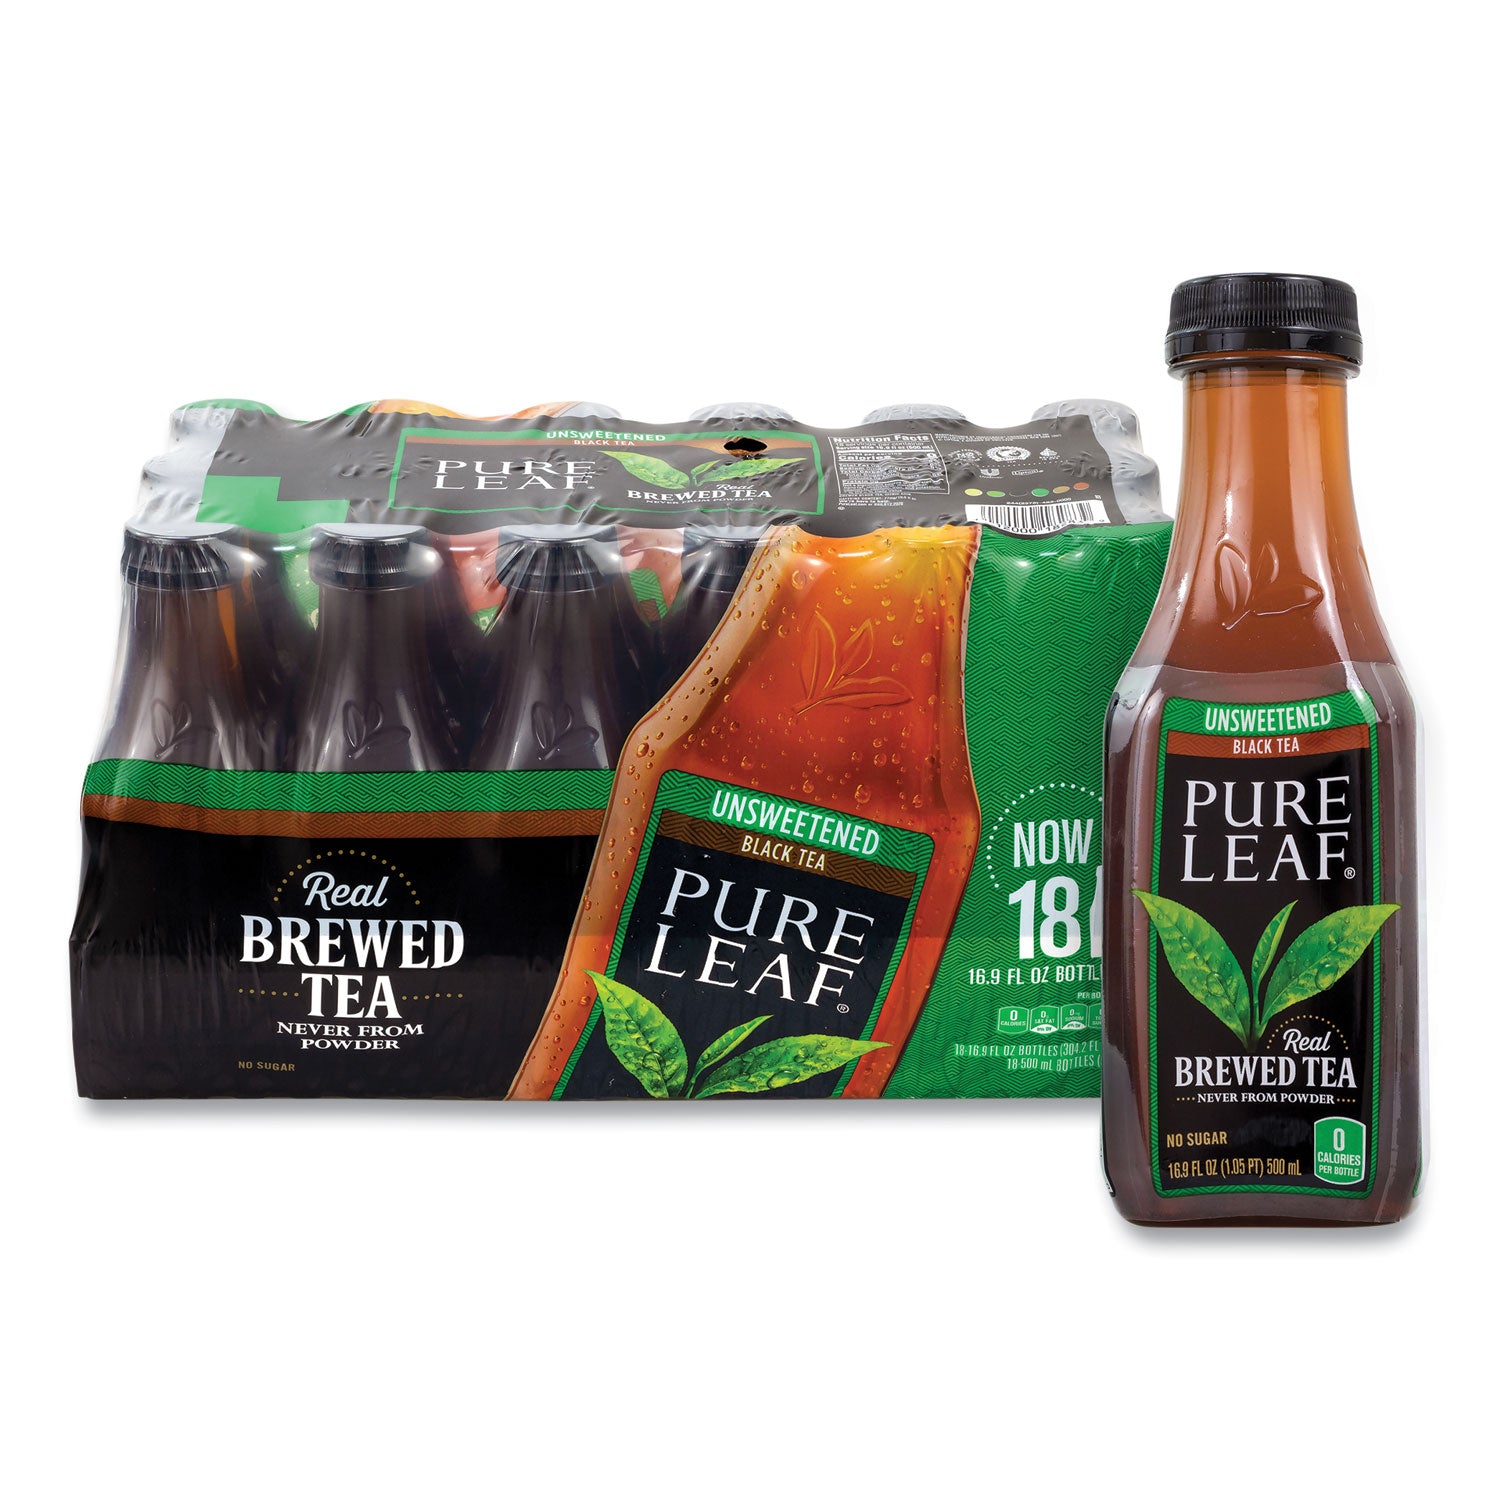 pure-leaf-unsweetened-iced-black-tea-169-oz-bottle-18-carton-ships-in-1-3-business-days_grr22002027 - 1